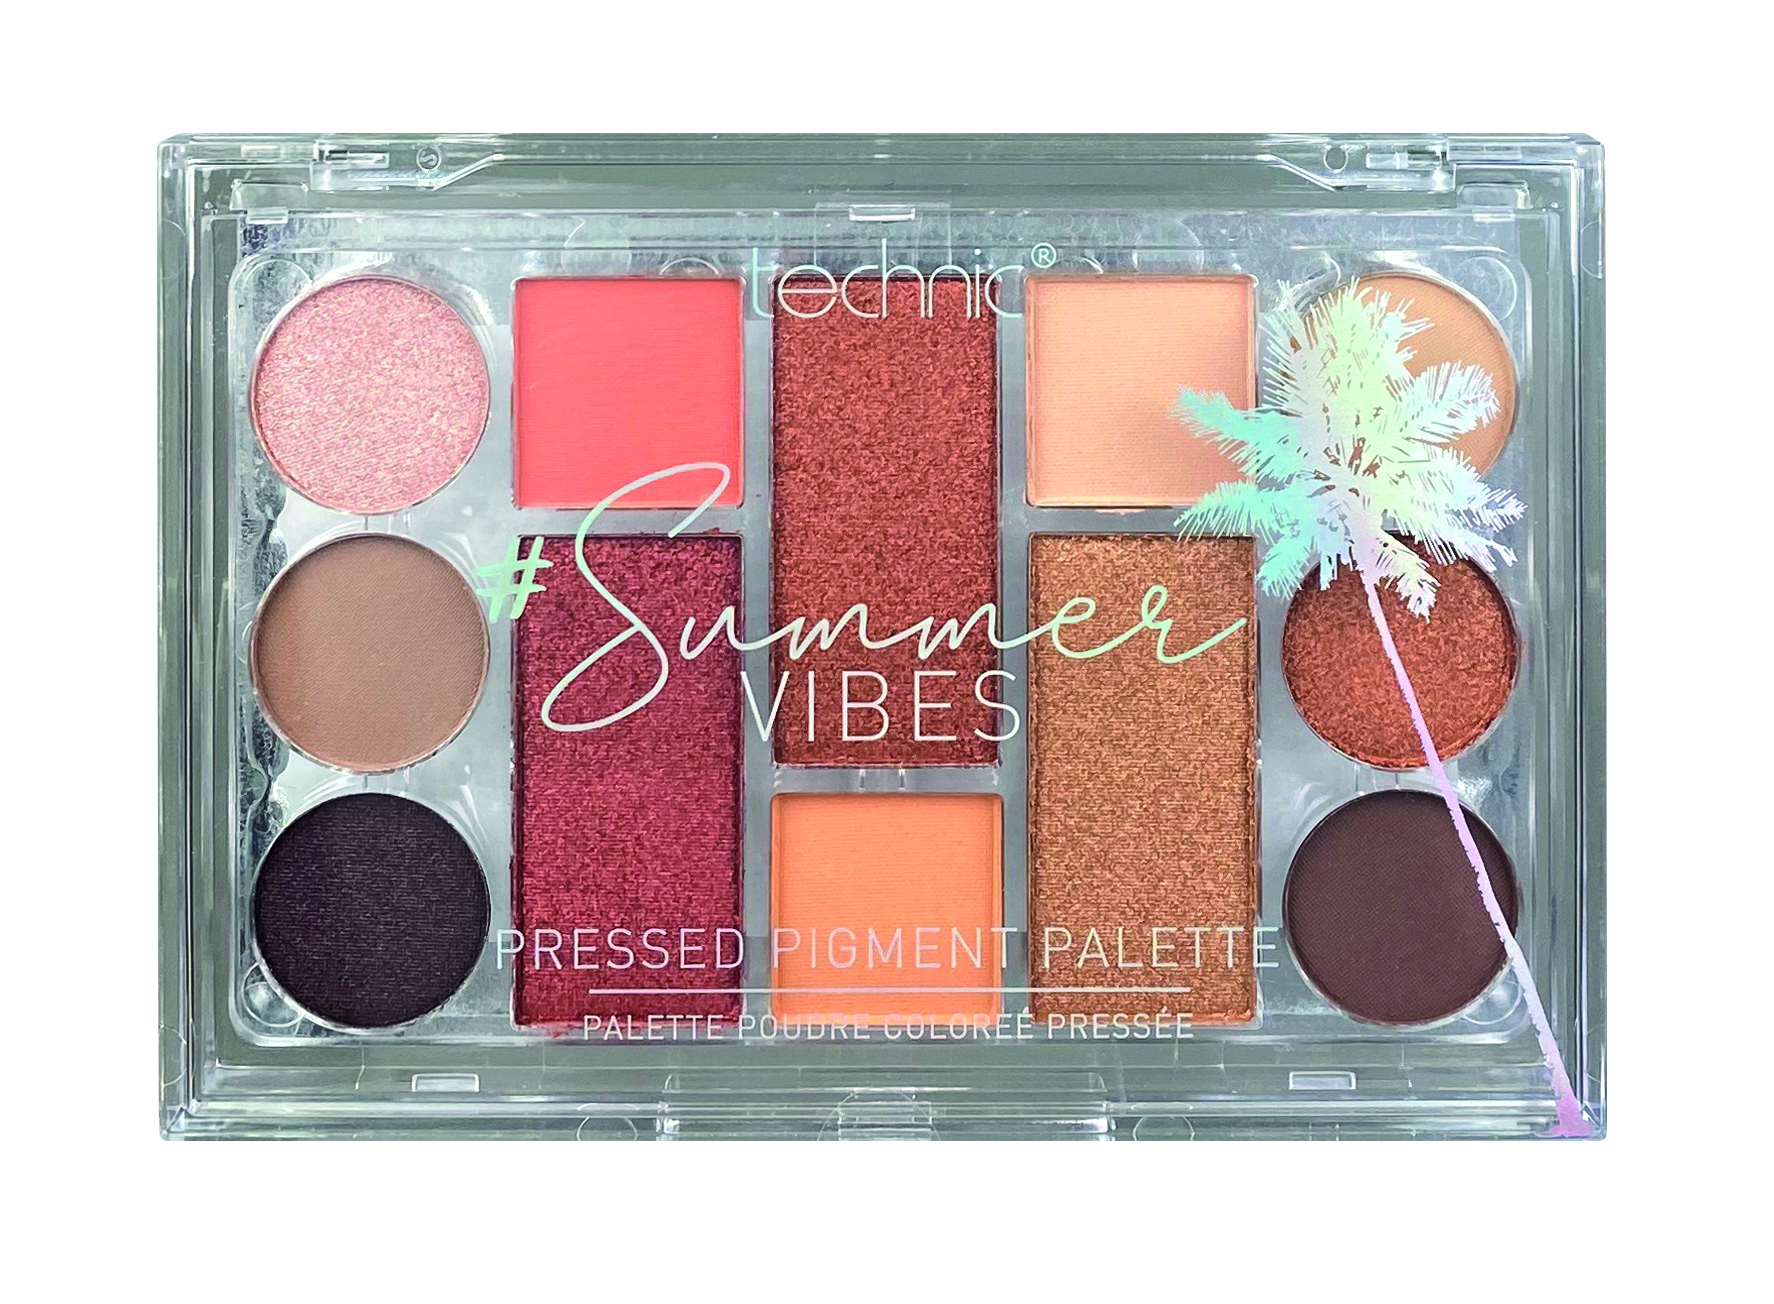 Technic Summer VIBES Pressed Pigment Palette